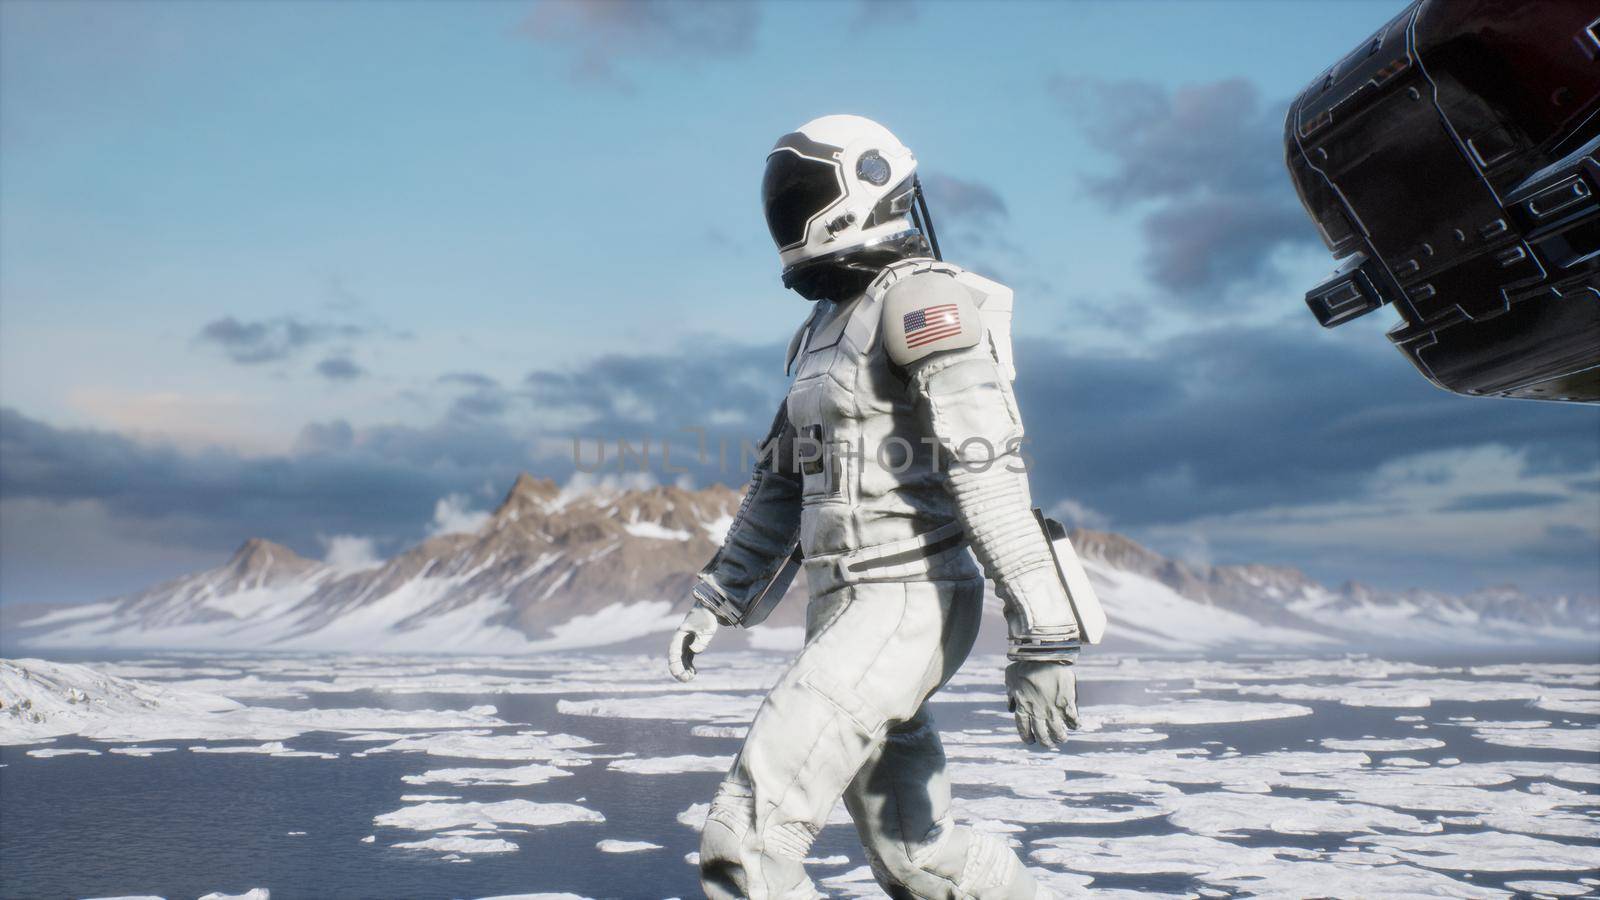 An astronaut-scientist studies a new unusual planet covered with ice and snow.